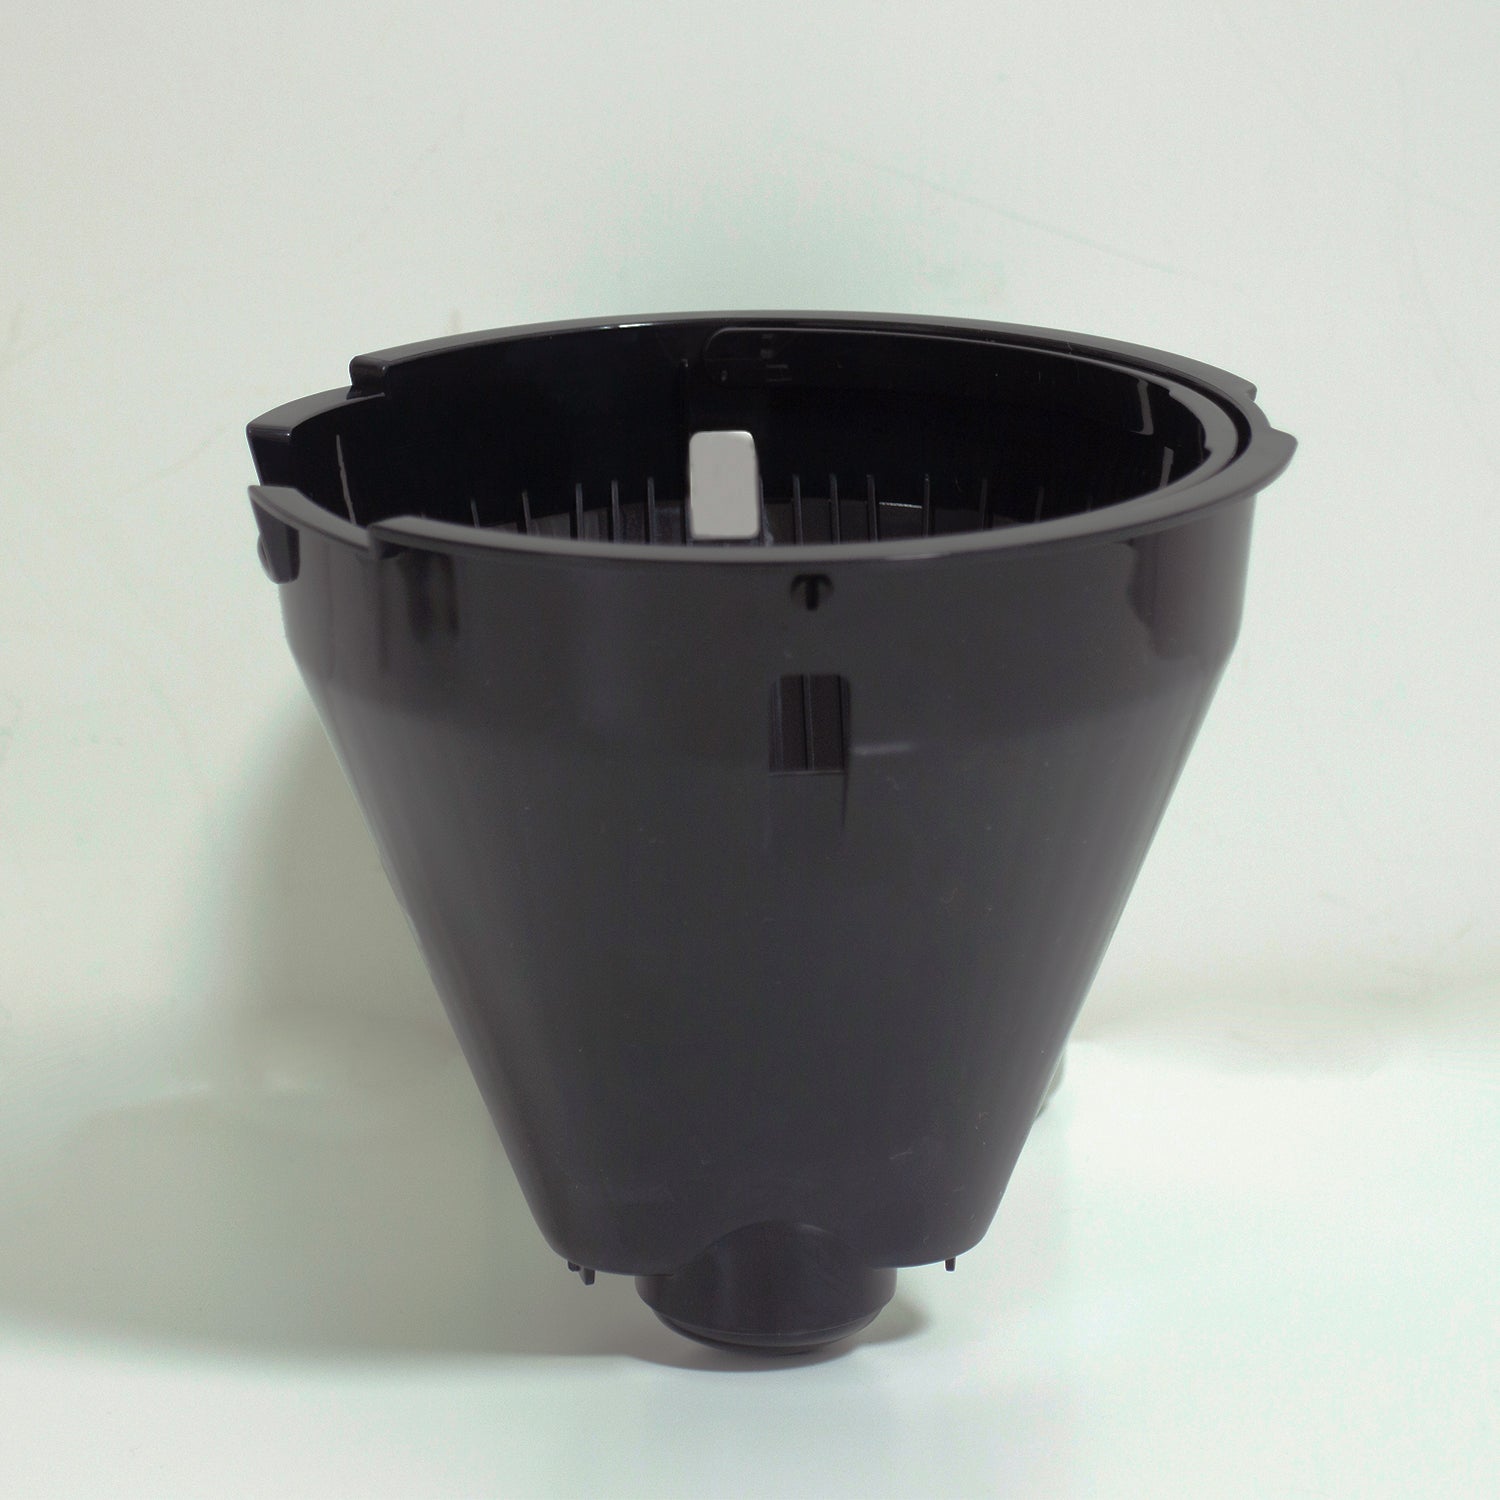 Filter Basket For Melitta Vision Auto Drip Coffee Maker